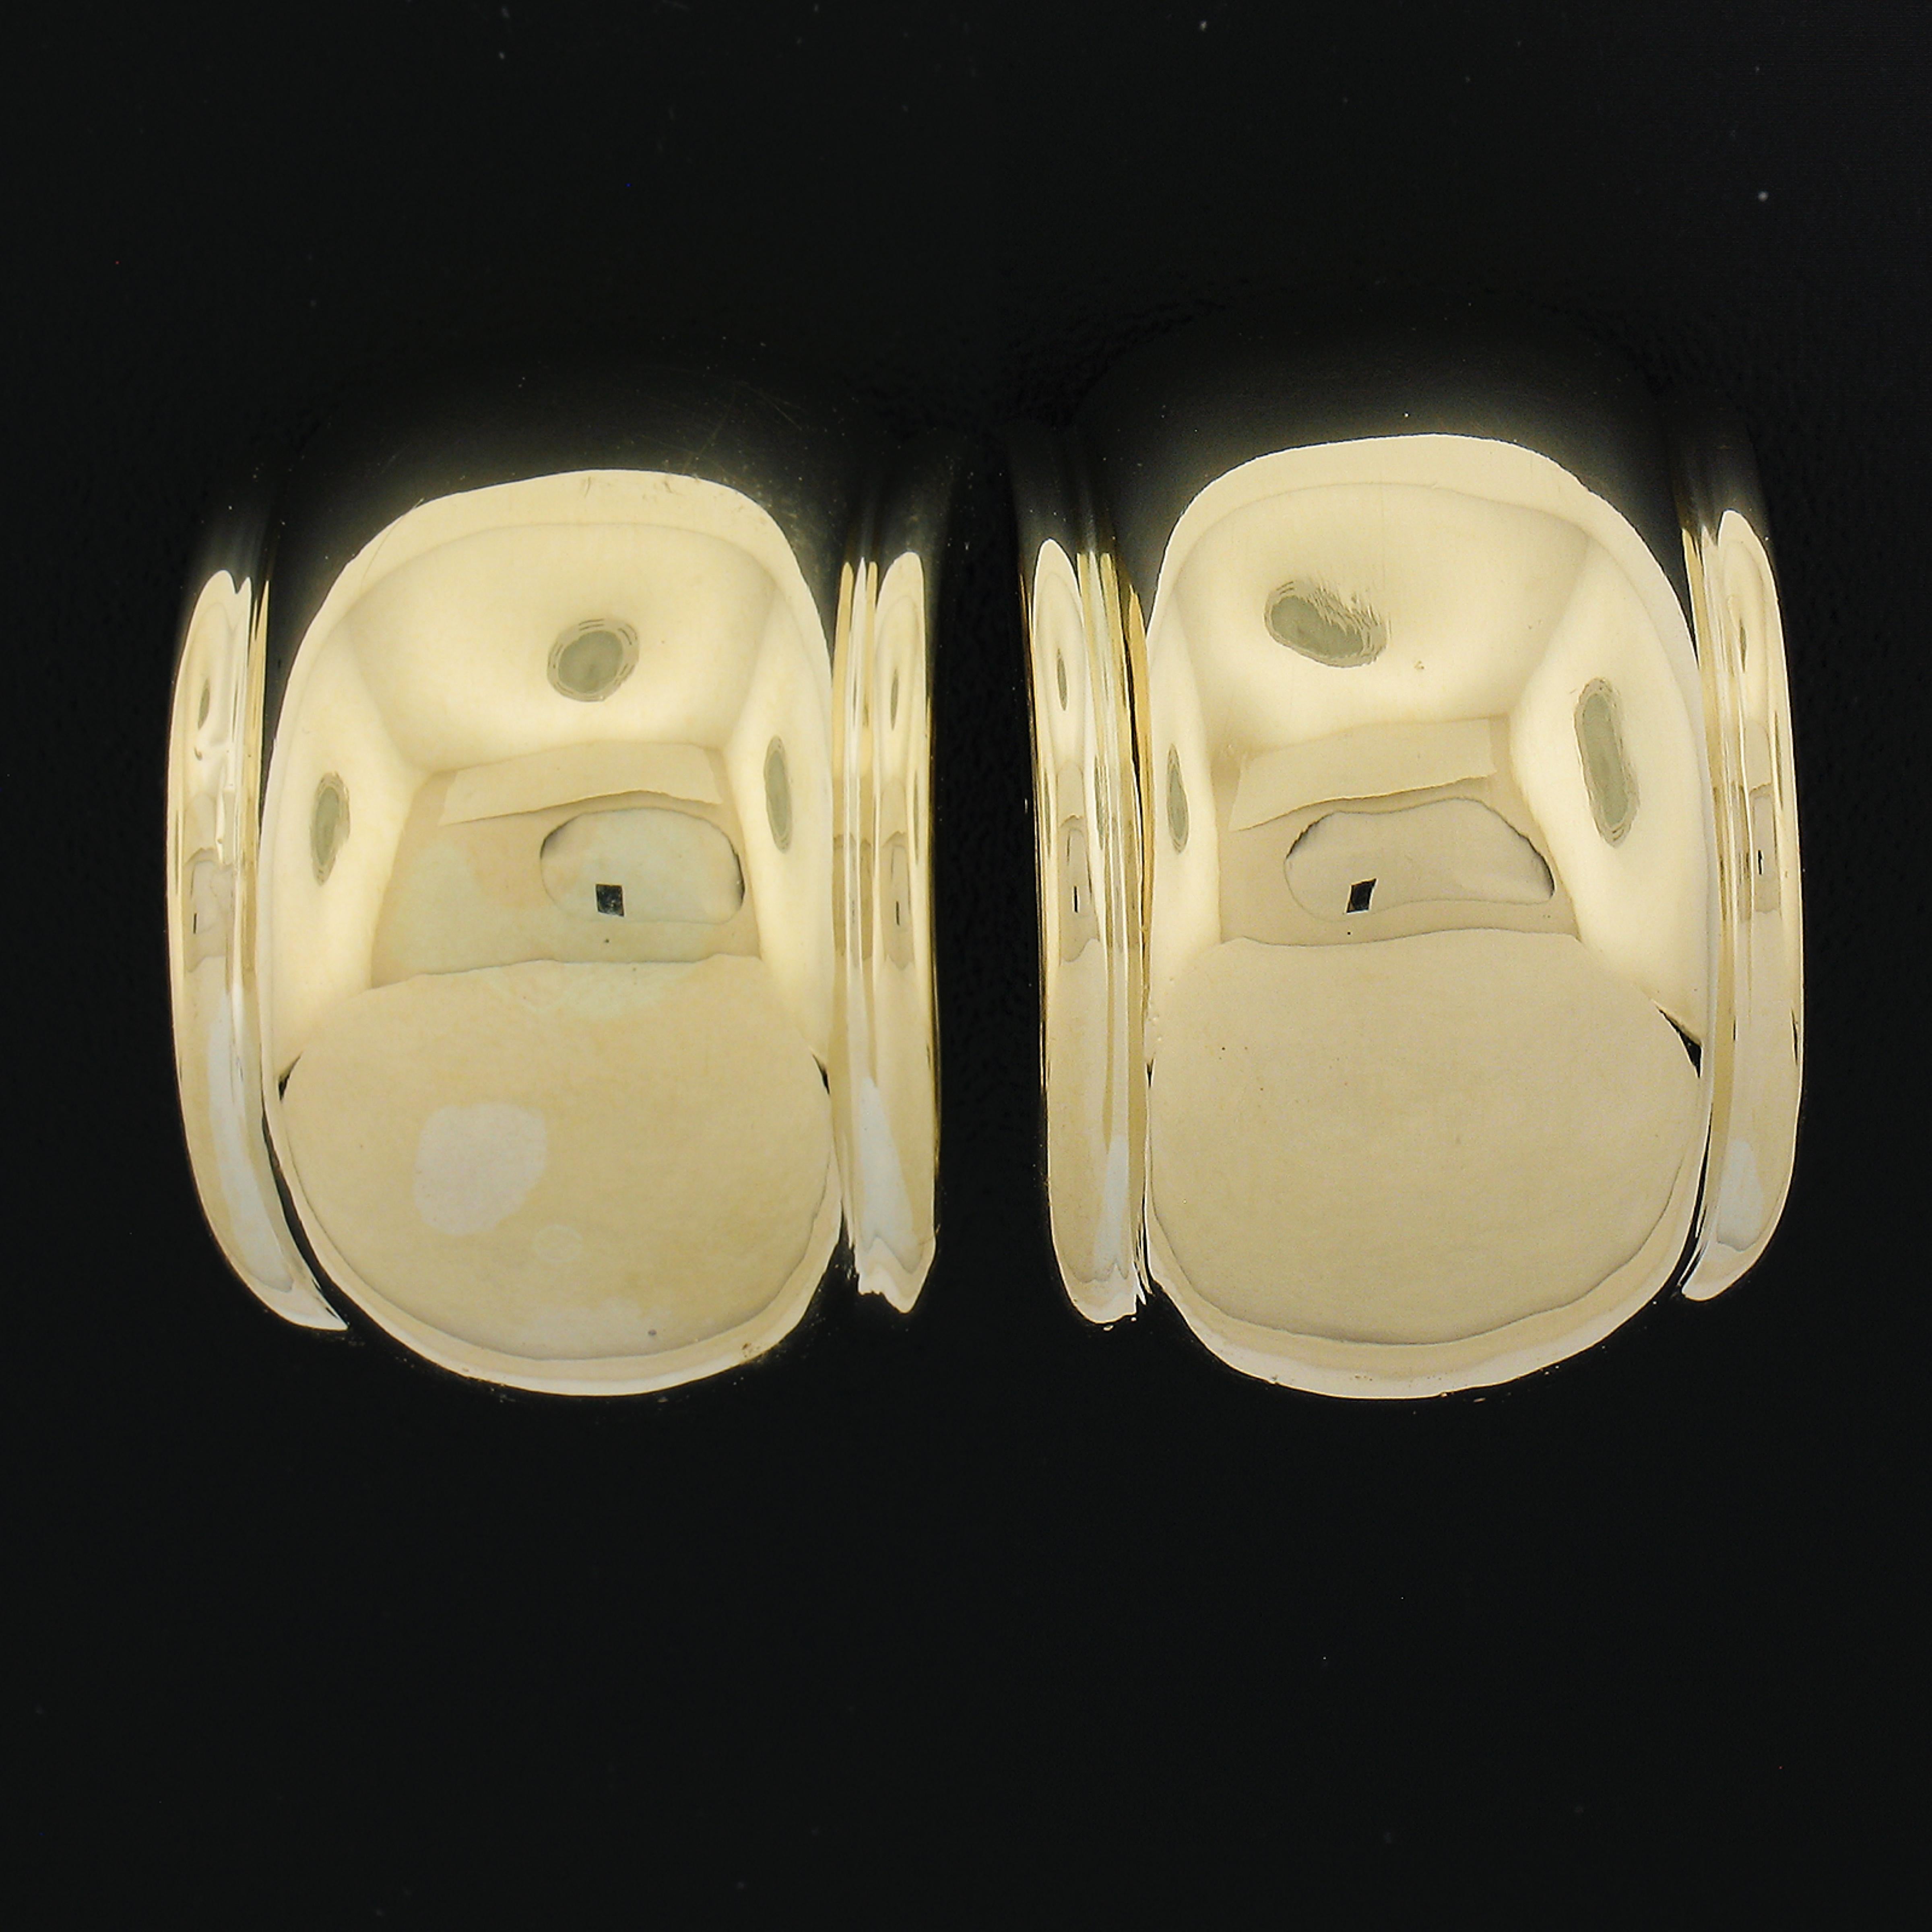 Material: Solid 18k Yellow Gold w/ White Gold Backings
Weight: 19.35 Grams
Backing: Clip On Closures (Pierced ears are NOT required.)
Width: 16.9mm (0.66